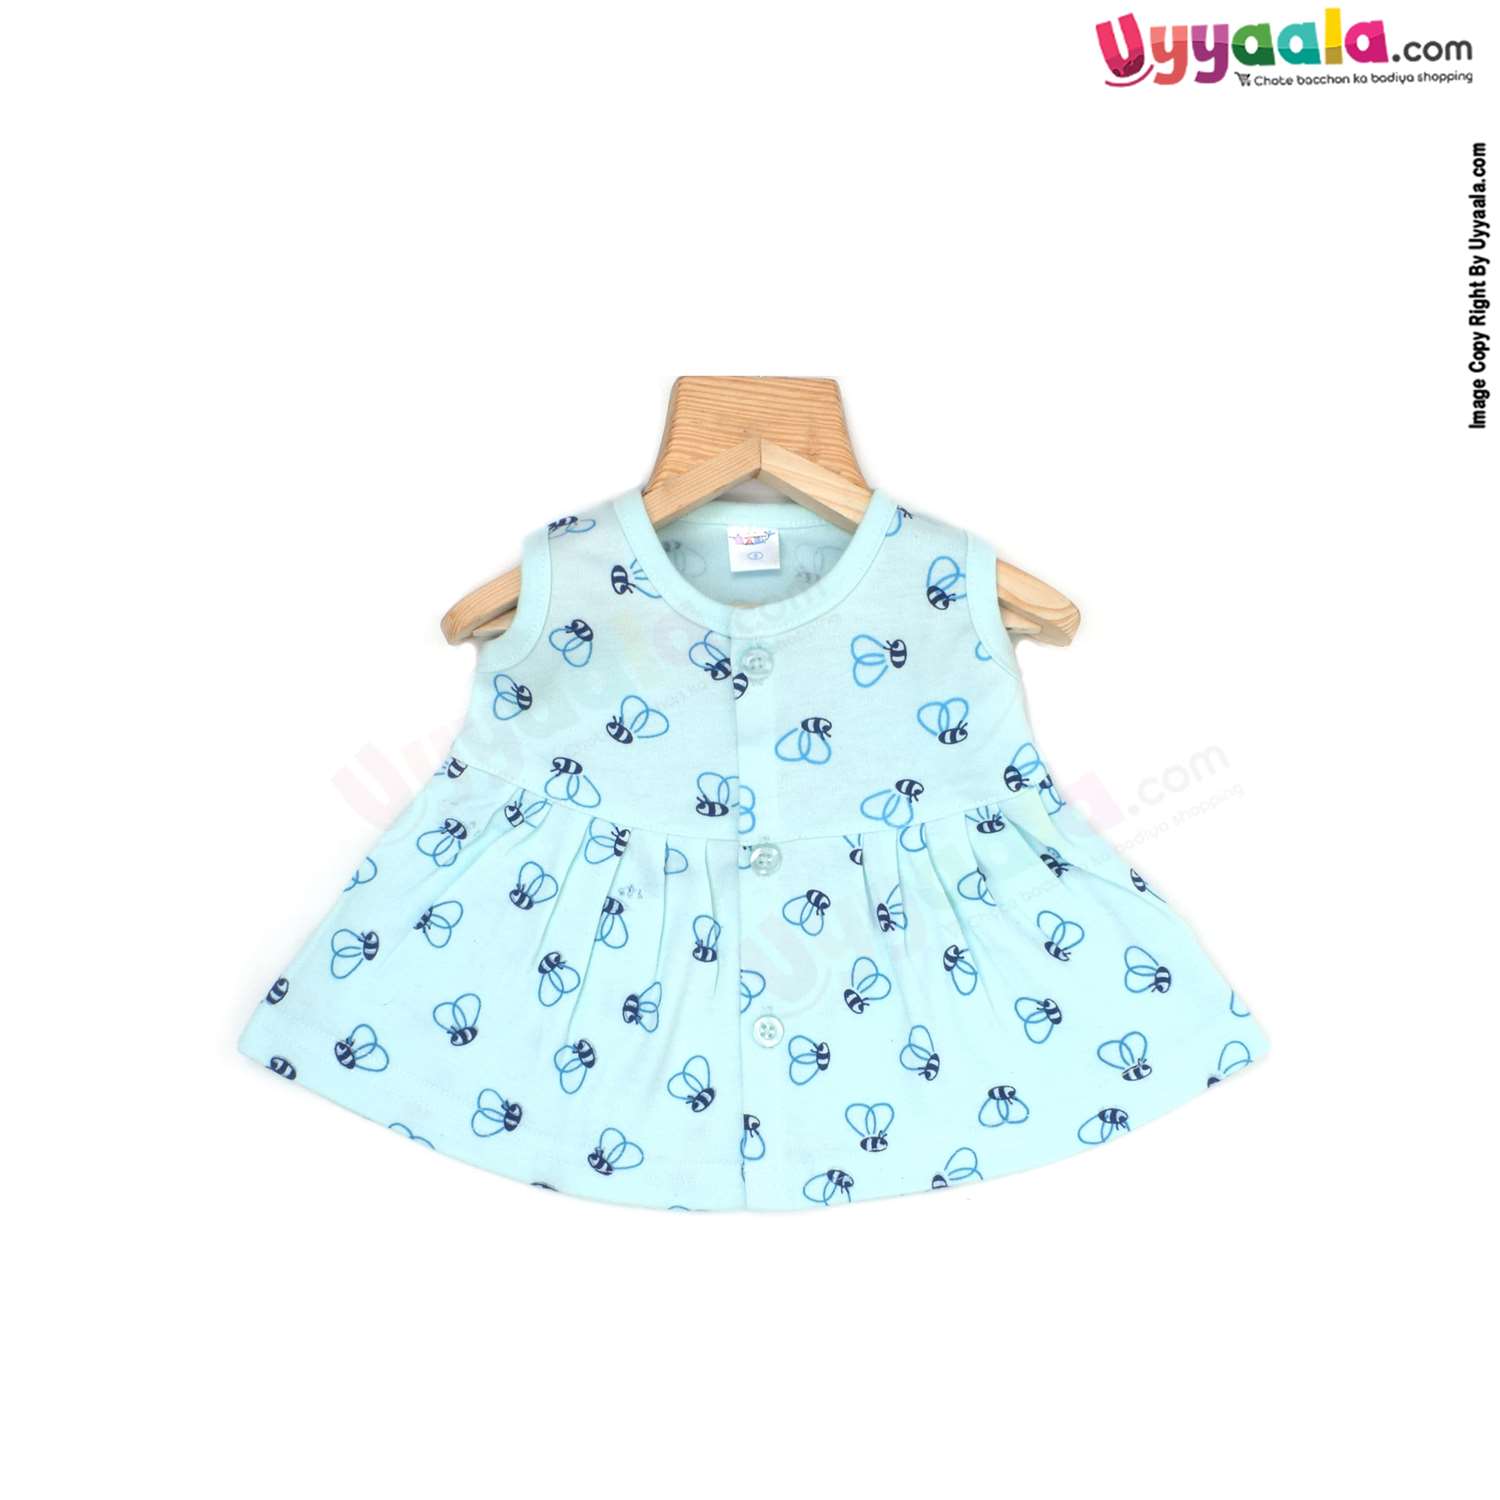 Newborn Baby Clothes: Buy New Born Clothing & Infants Clothes | Mothercare  India